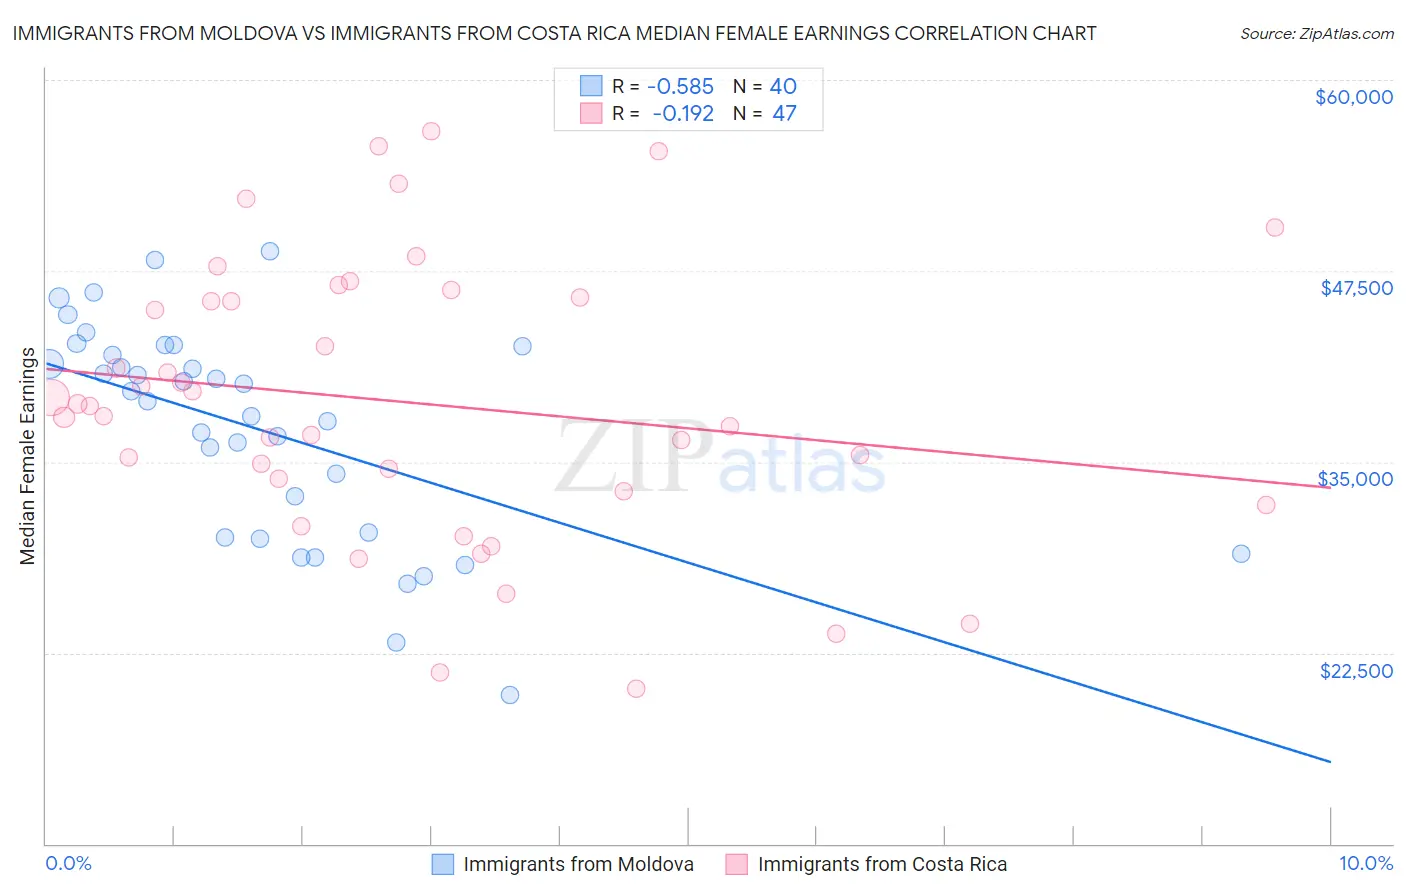 Immigrants from Moldova vs Immigrants from Costa Rica Median Female Earnings